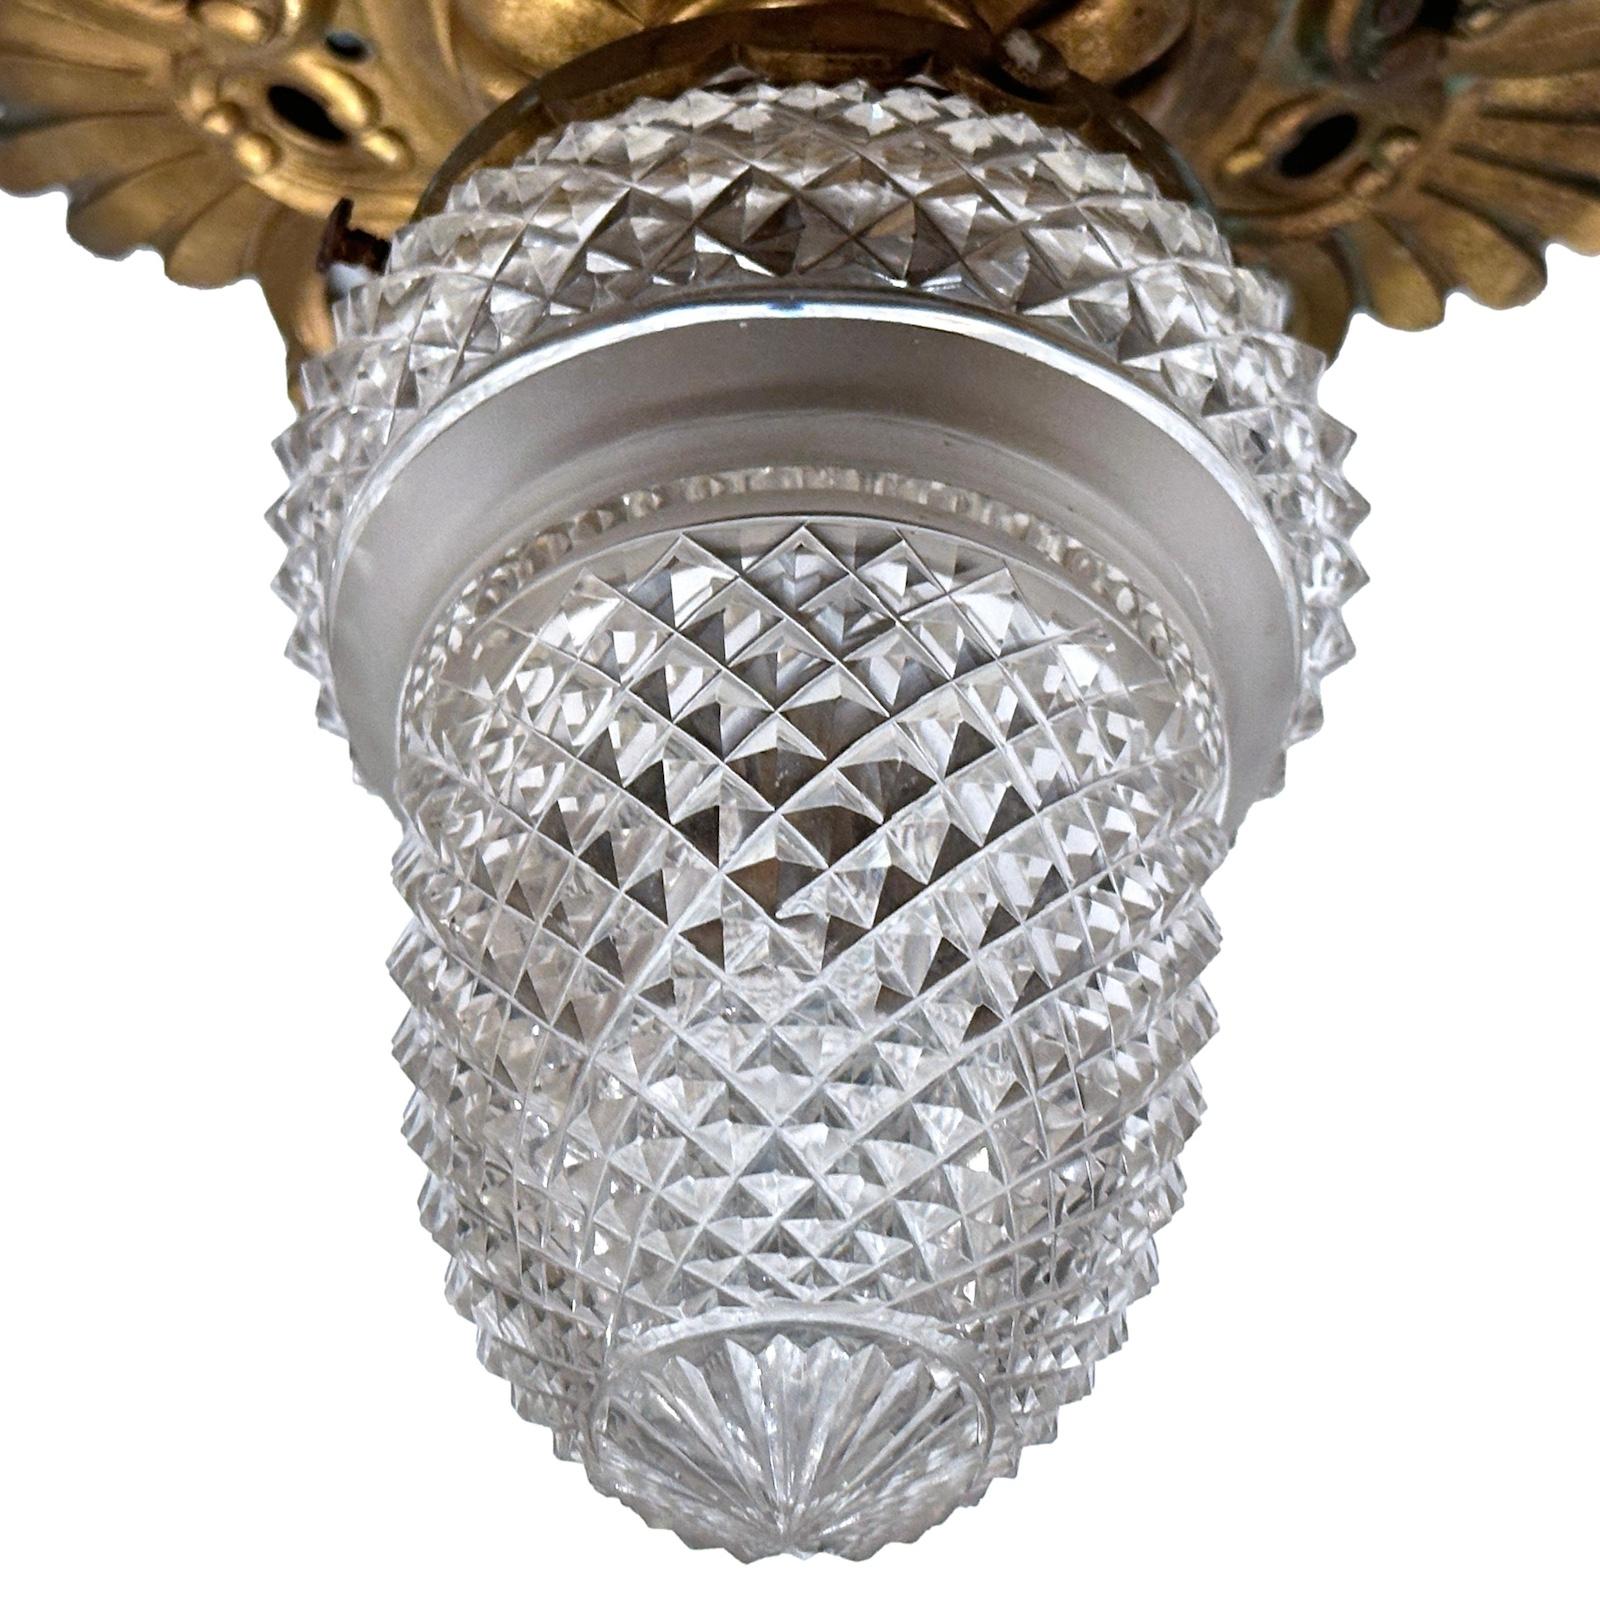 Antique English Flushmount Light Fixture In Good Condition For Sale In New York, NY